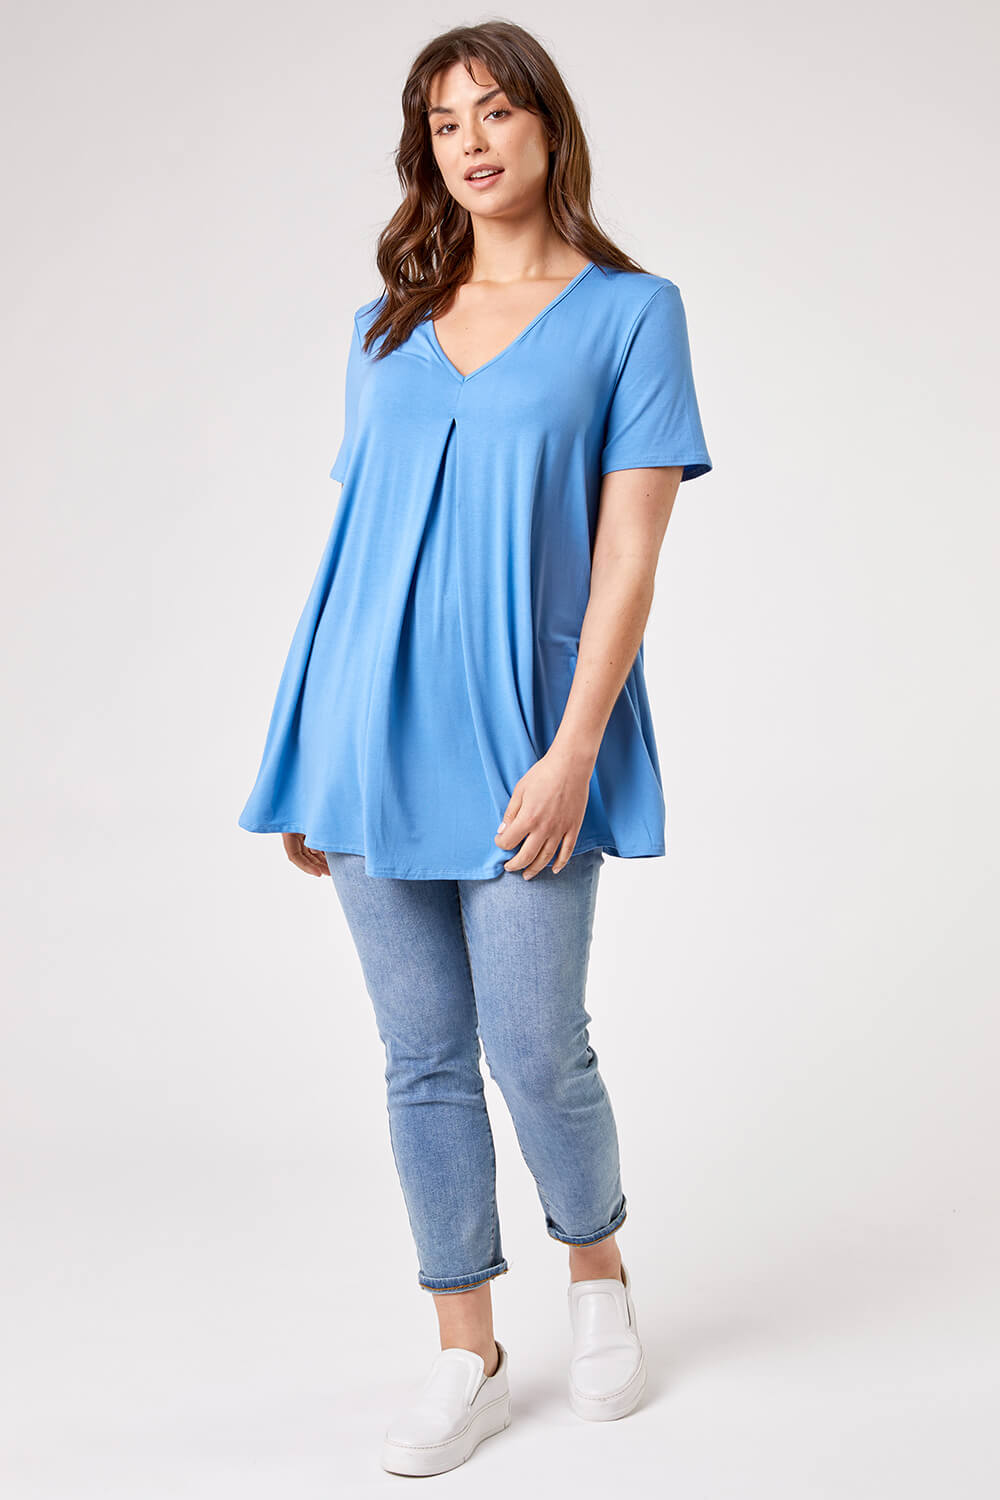 Blue Curve Pleat Front Jersey Tunic Top, Image 3 of 4